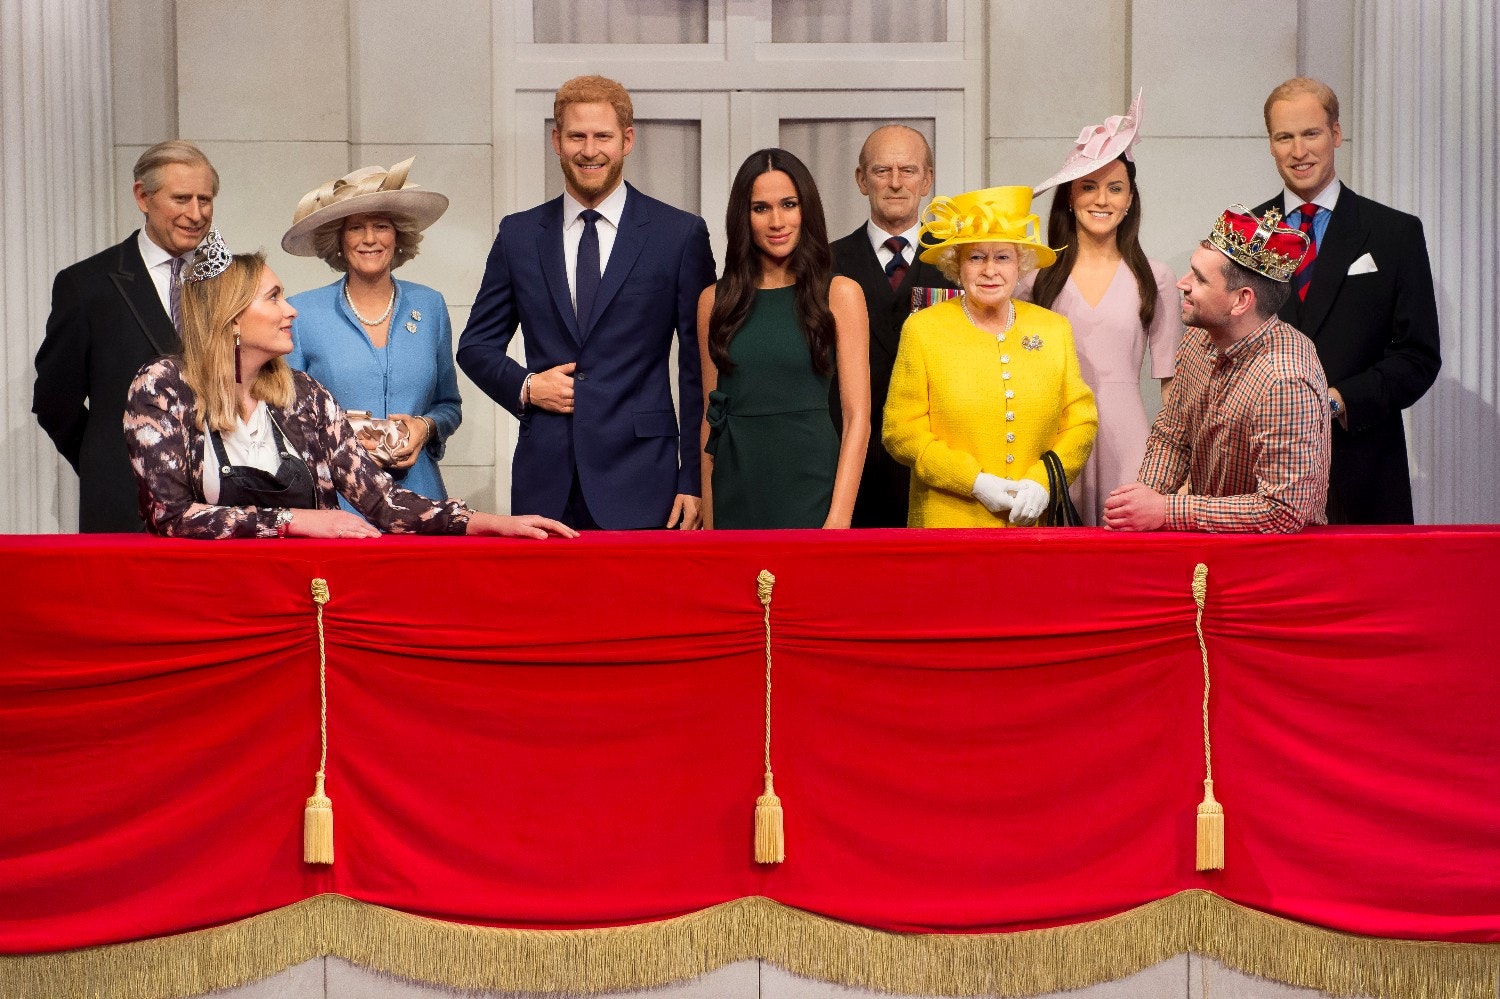 The Markle Sparkle arrives at Madame Tussauds 